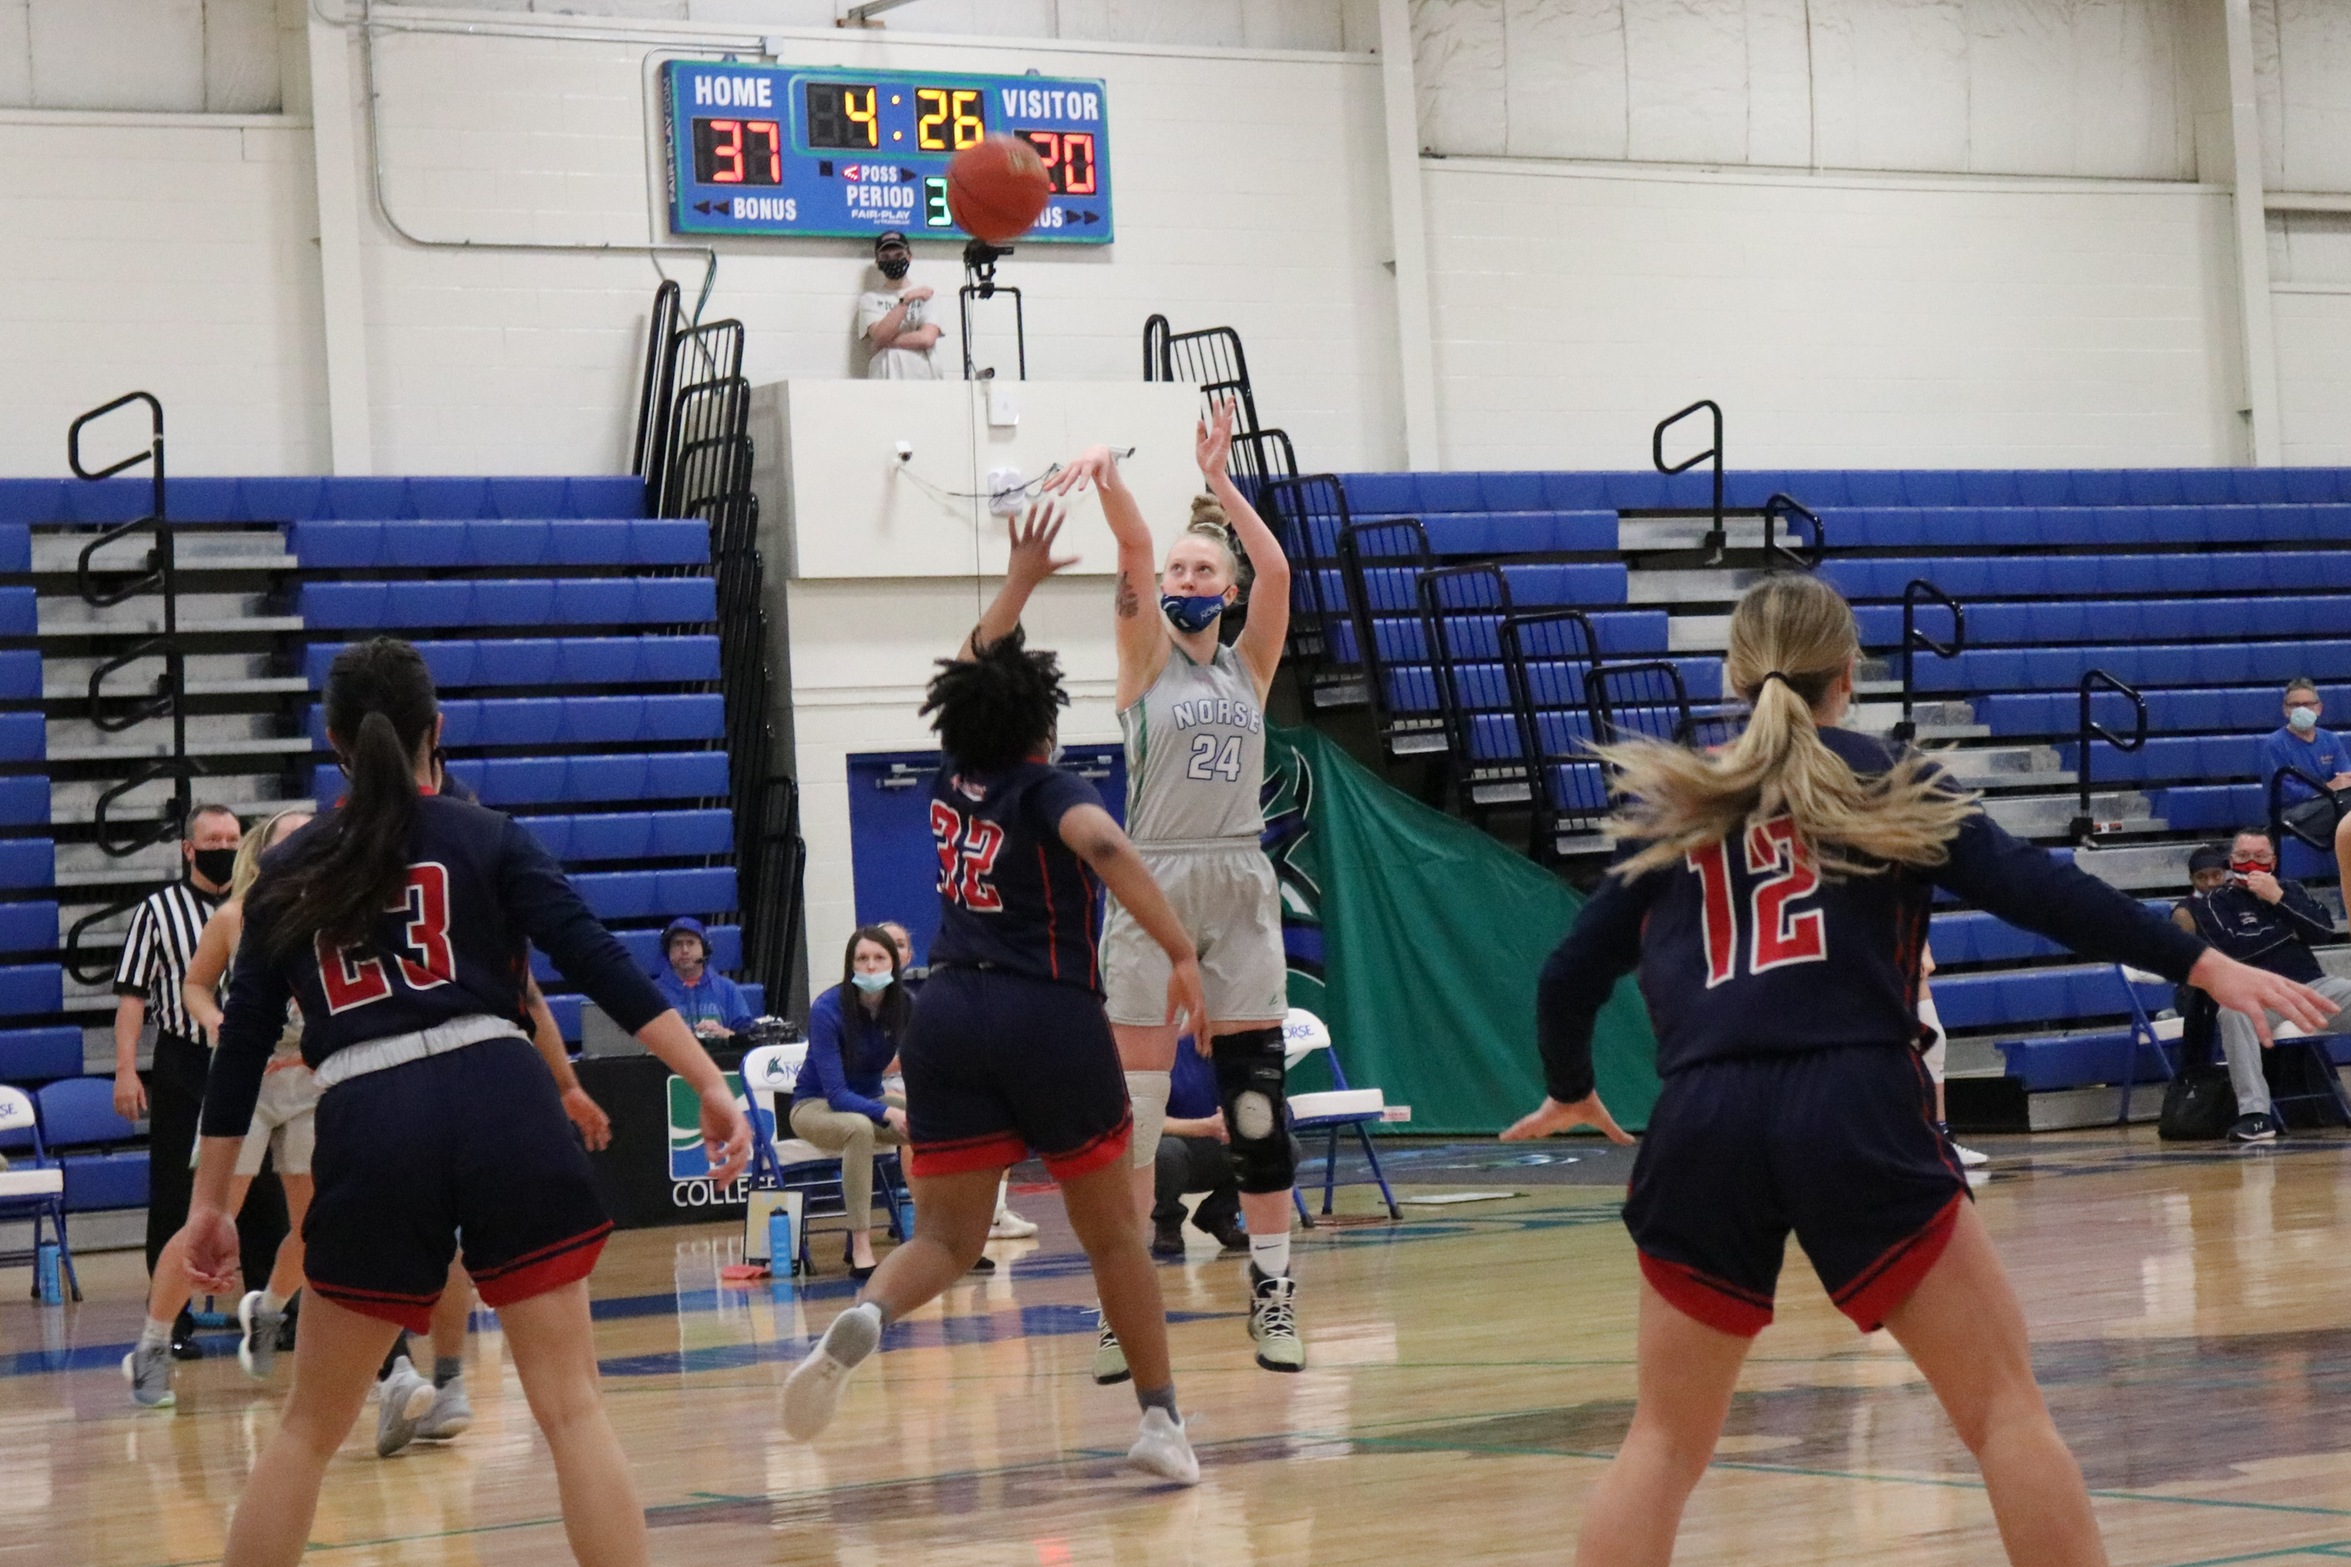 Madison Olsen shoots a three as a defender closes in on her